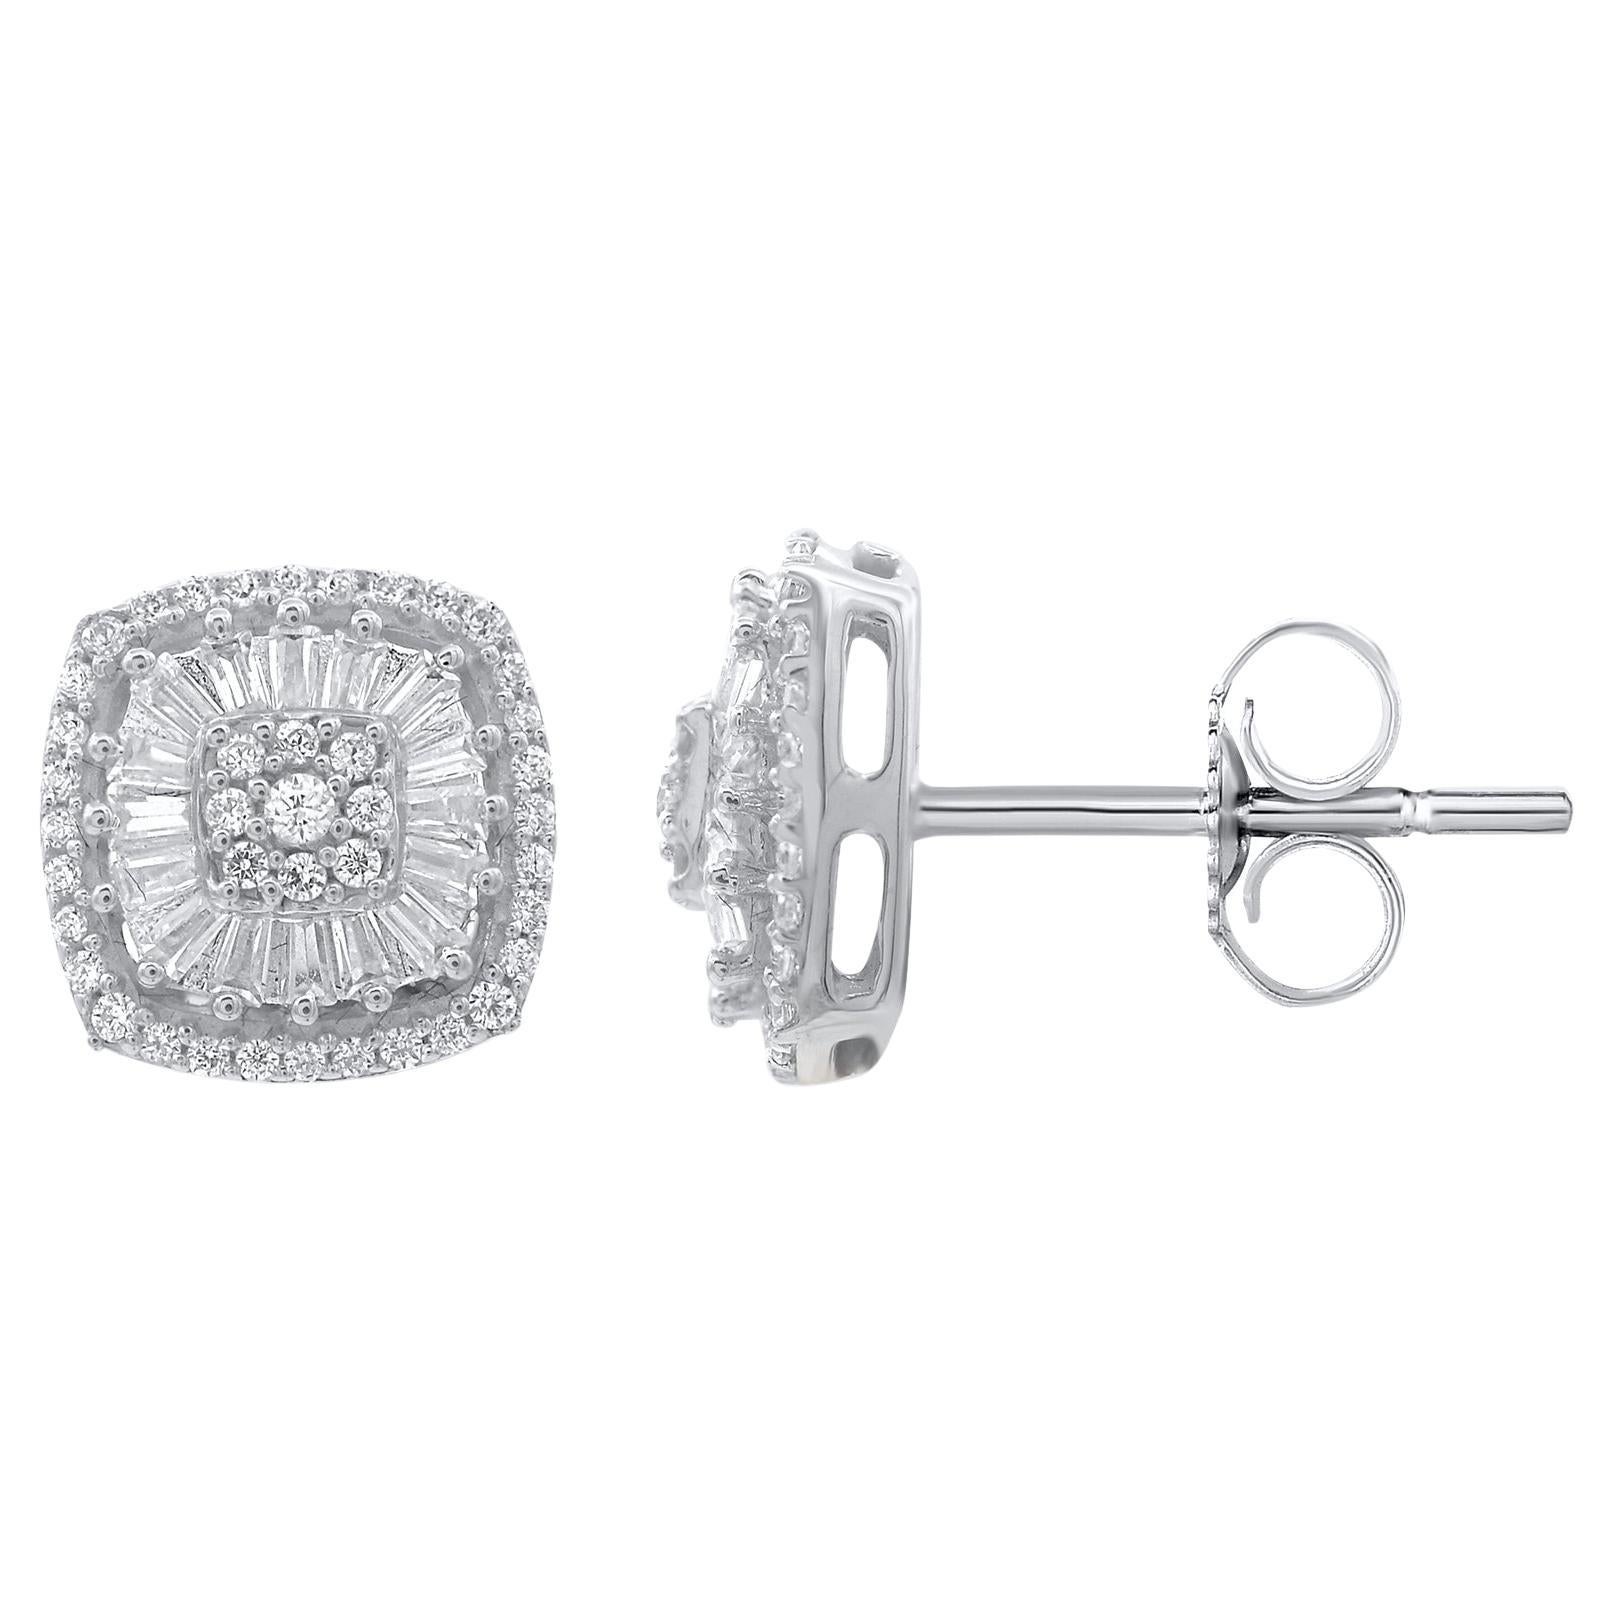 Timeless and elegant, these diamond stud earrings go from day to night with ease. This earring is beautifully designed and studded with 114 natural round diamond and baguette diamond set in prong & channel setting. The total diamond weight is 0.50